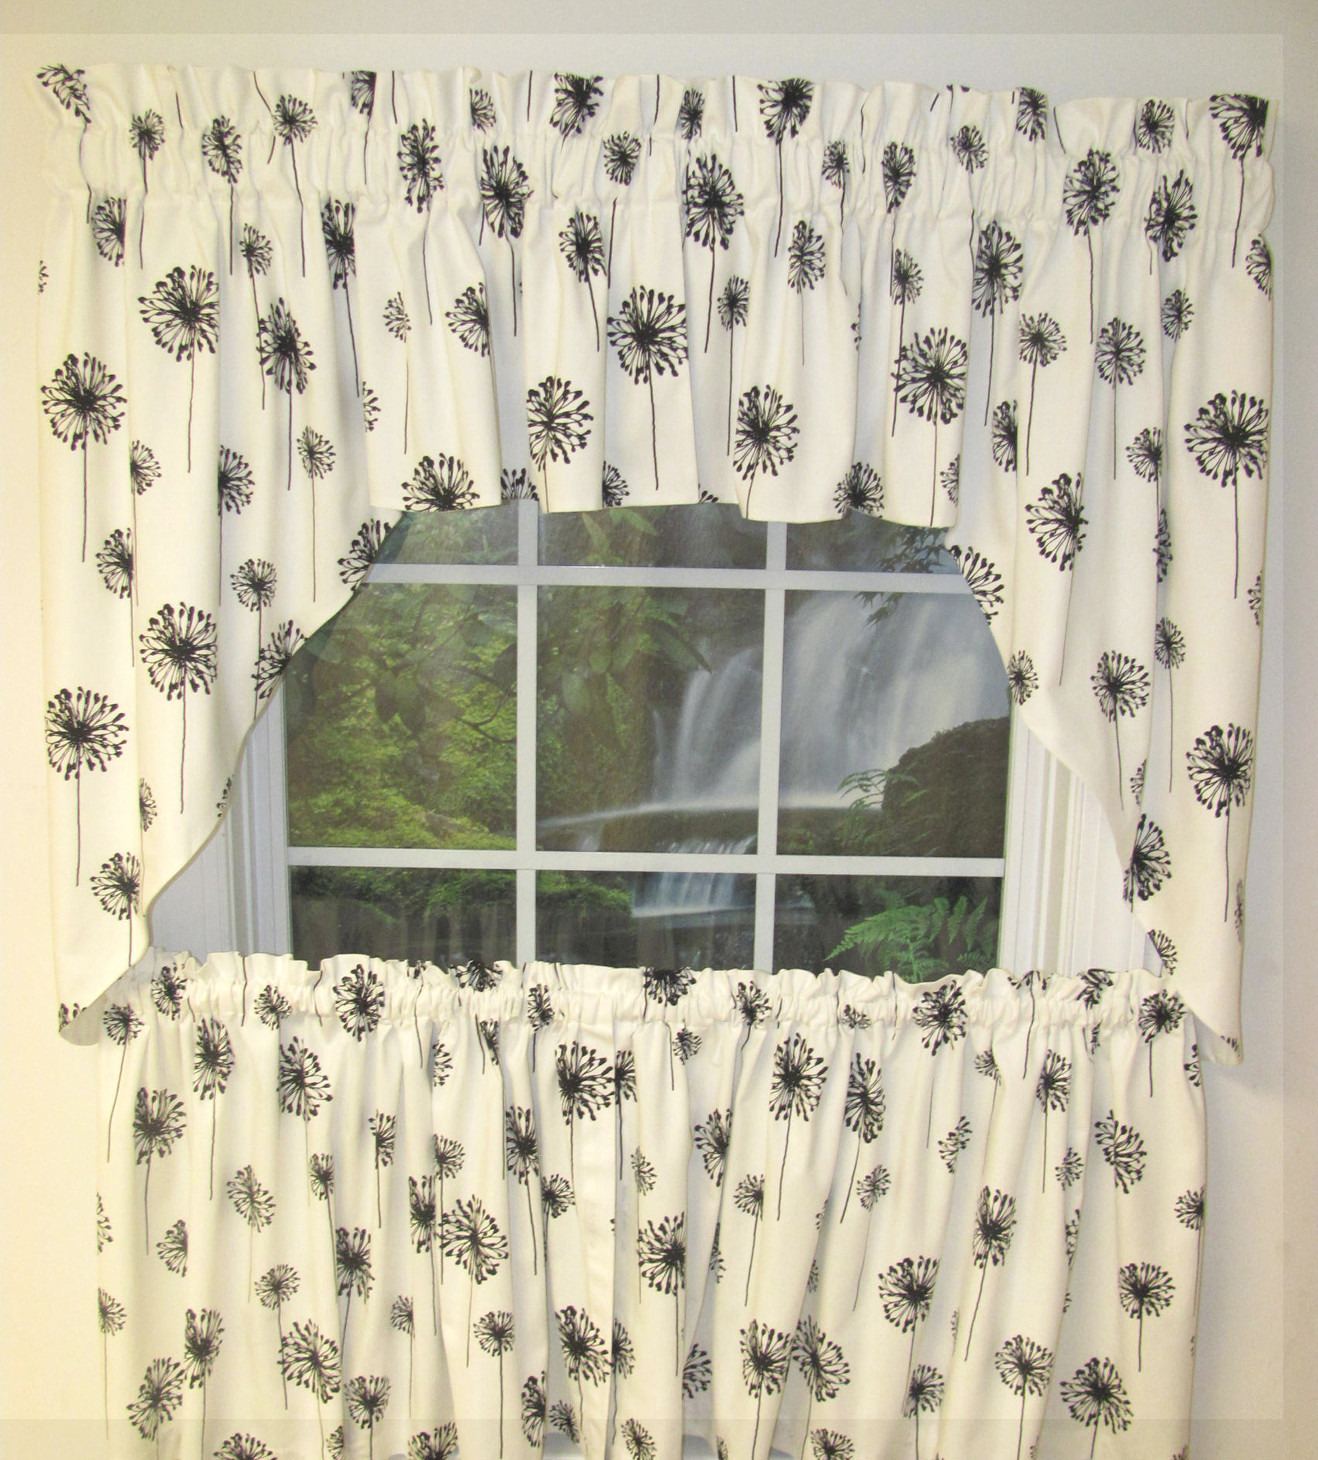 Jcpenney Curtains Kitchen
 Curtain Elegant Interior Home Decorating Ideas With